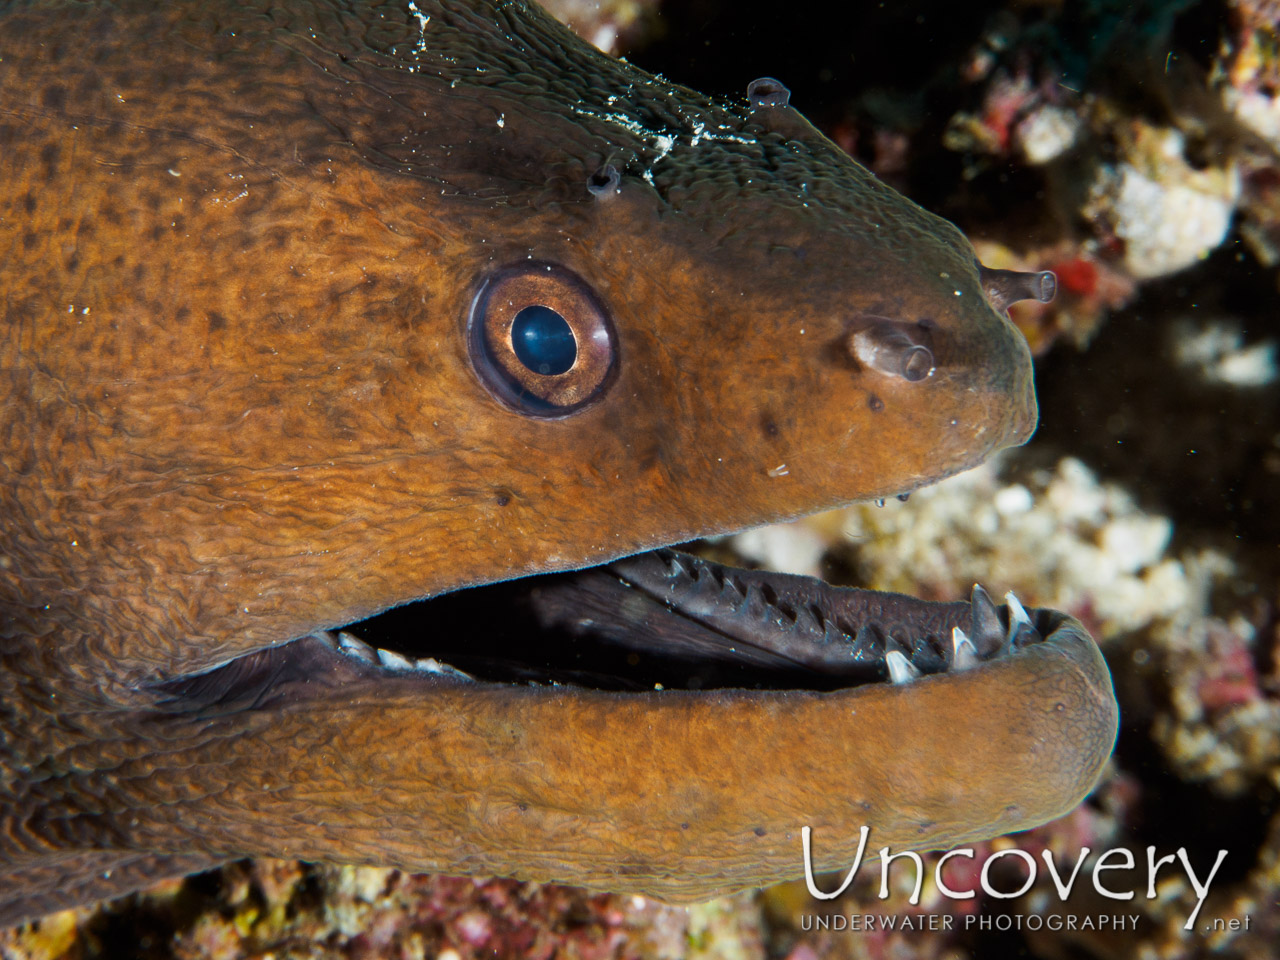 Giant Moray (gymnothorax Javanicus), photo taken in Maldives, Male Atoll, South Male Atoll, South Reef Out